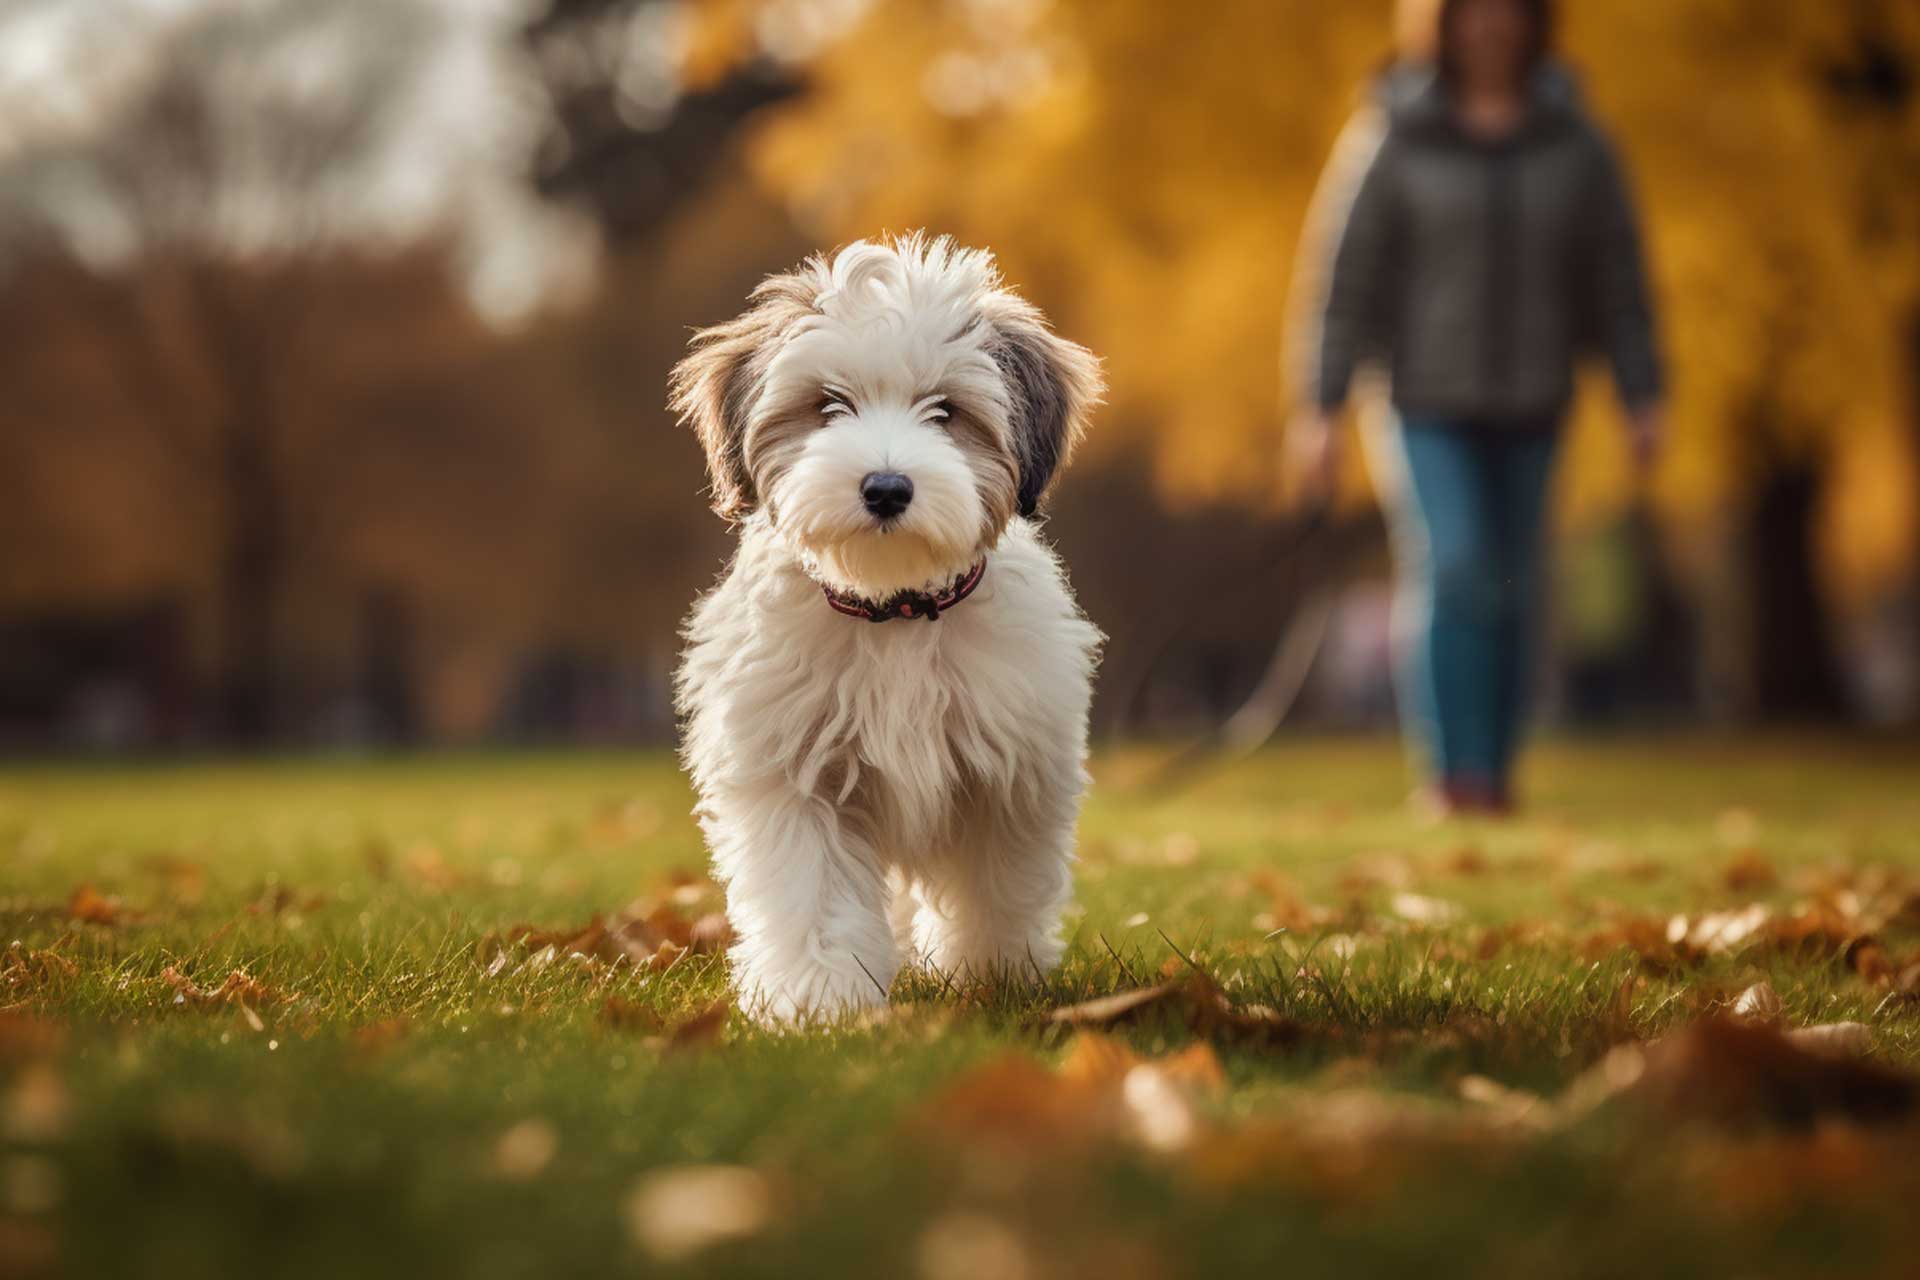 Mini Sheepadoodle training with owner in the park on green grass